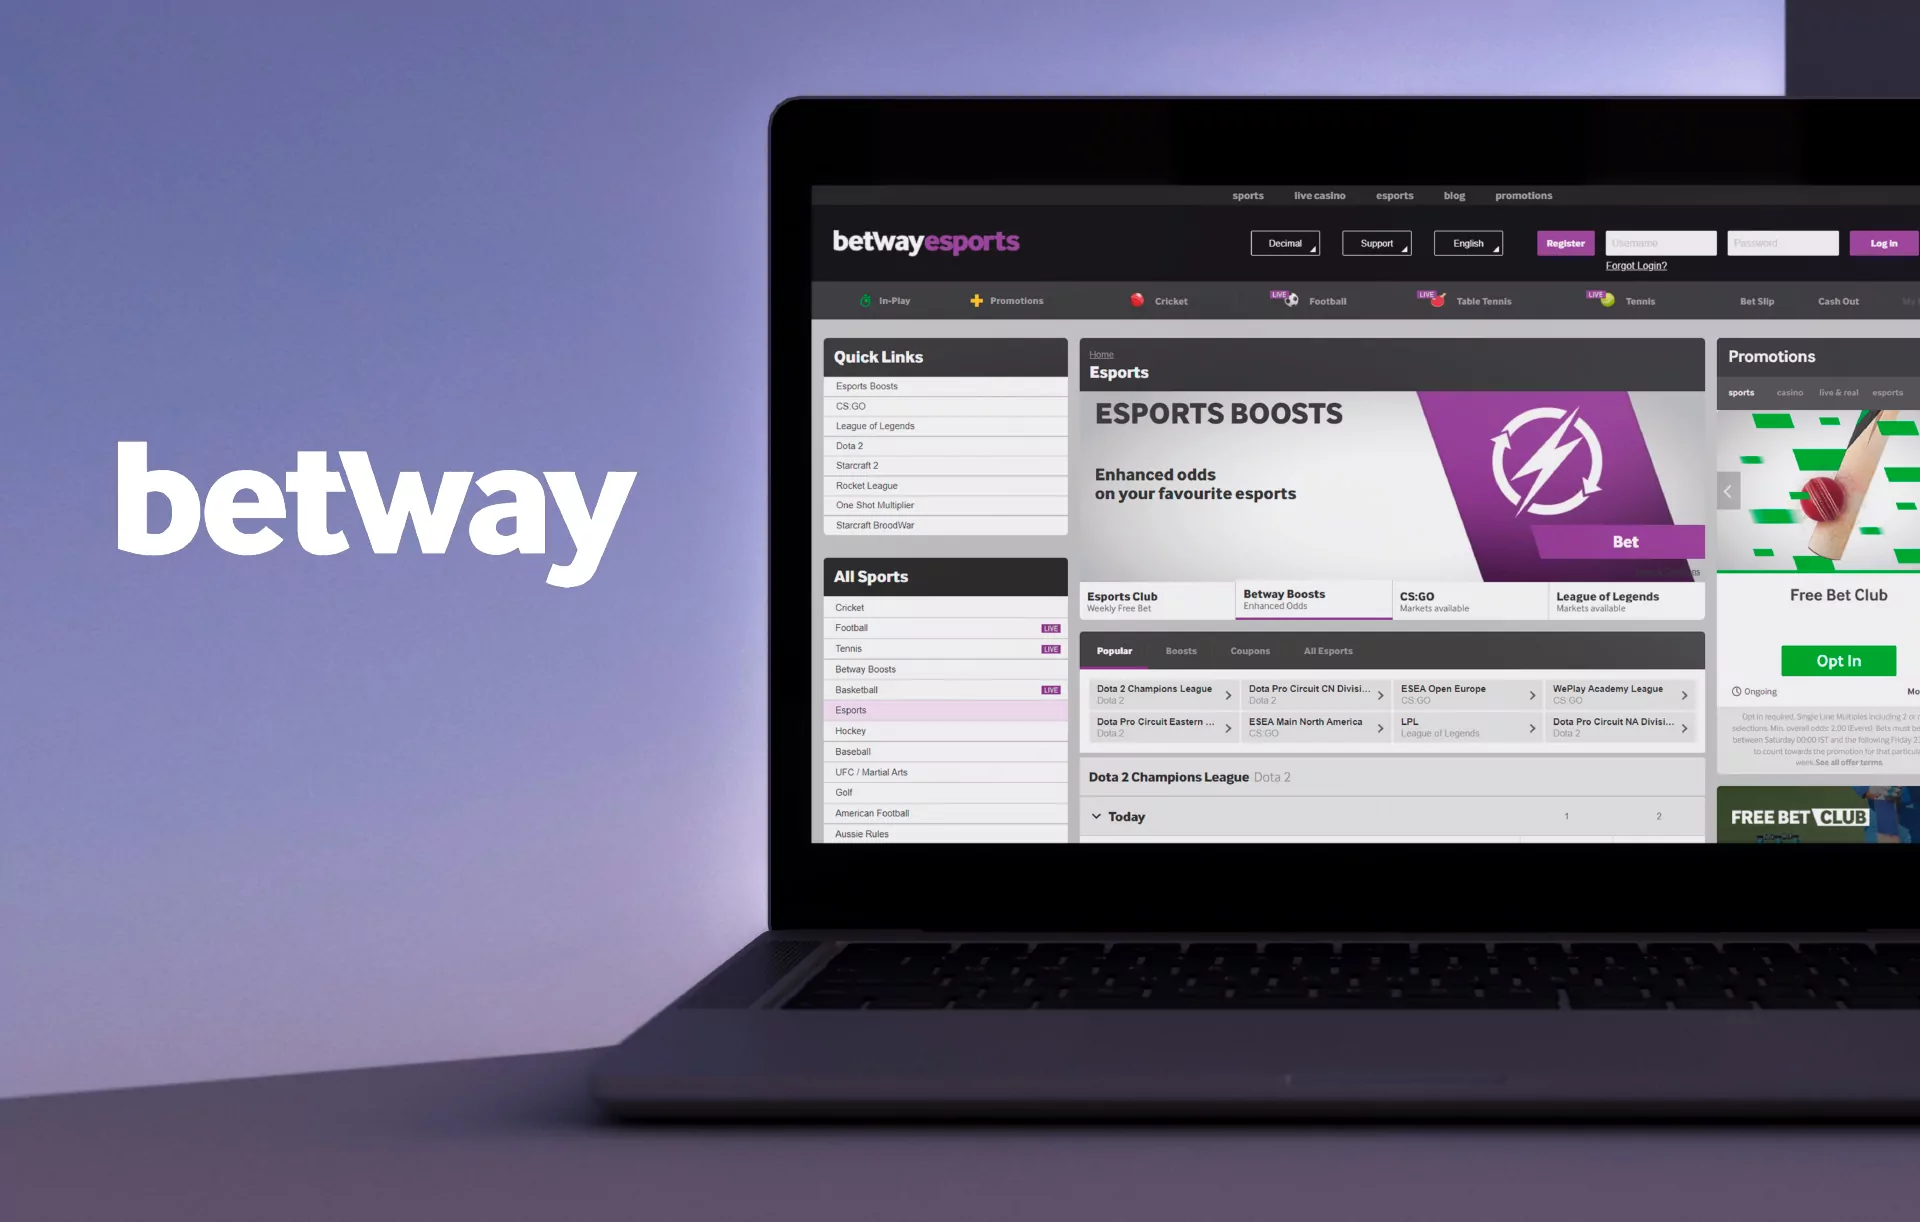 Betway is one of the oldest bookmaker offices and obviously accepts bets on esports events.